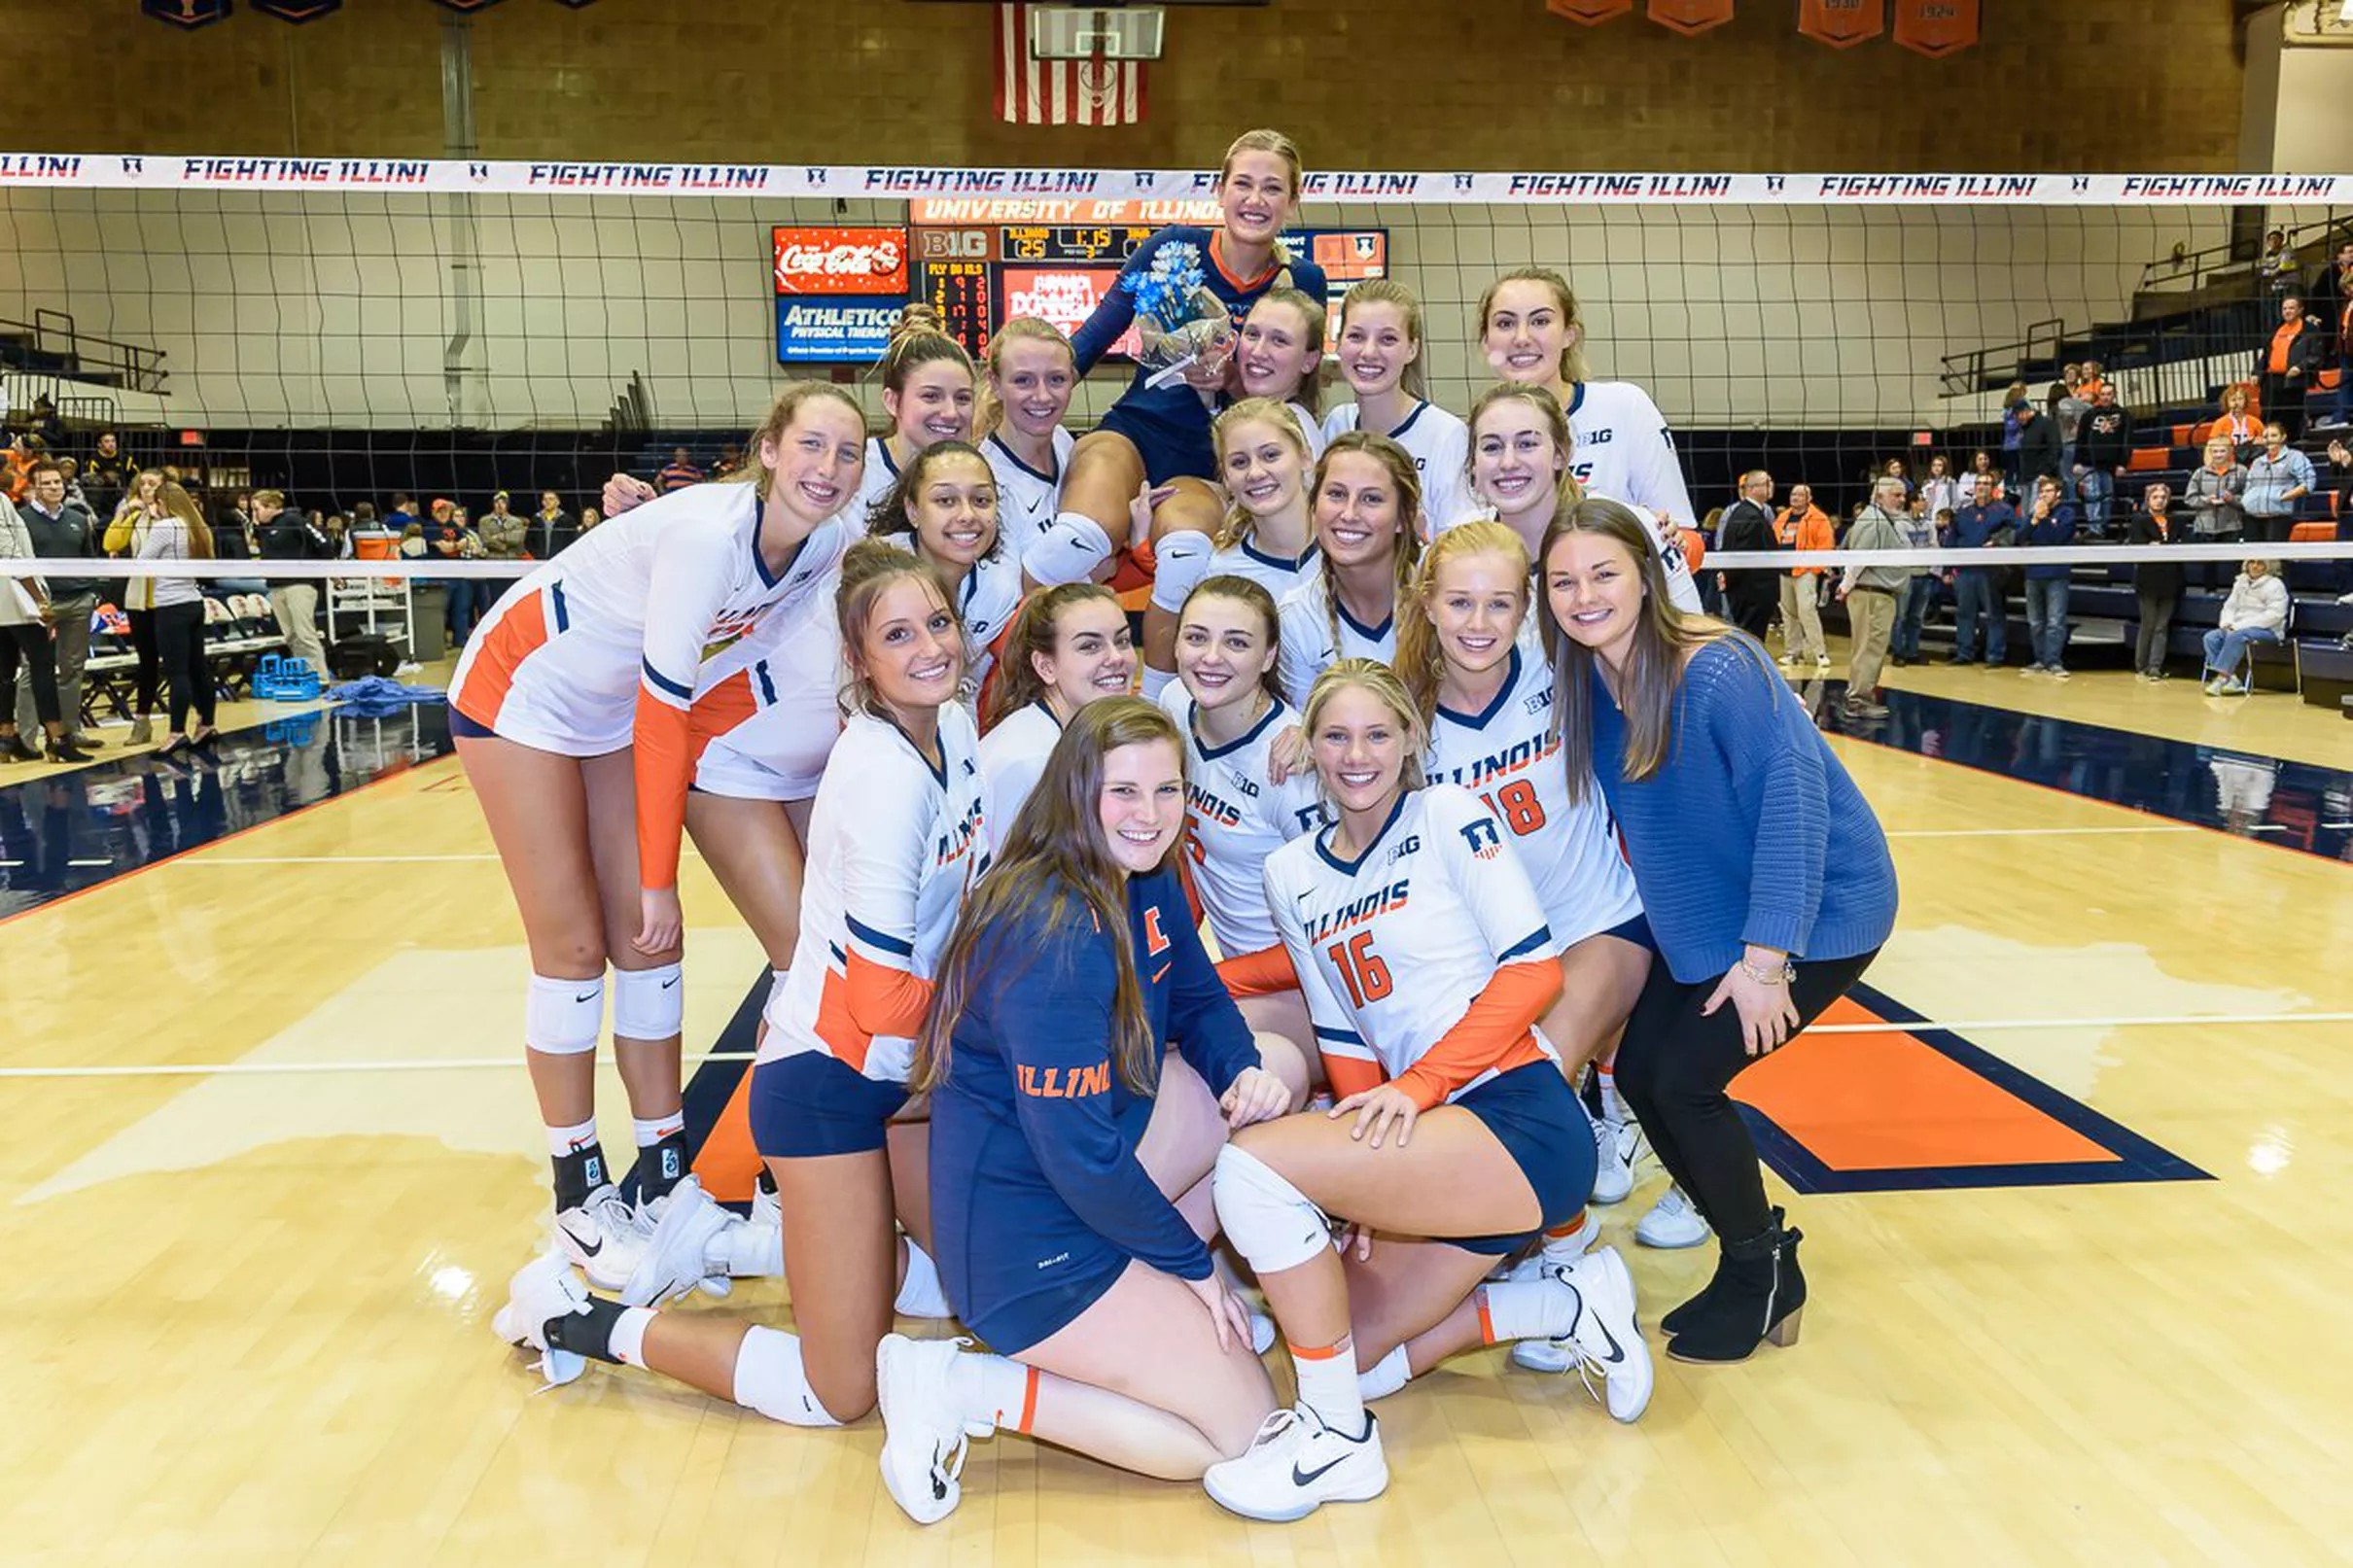 Illinois volleyball made the NCAA Tournament